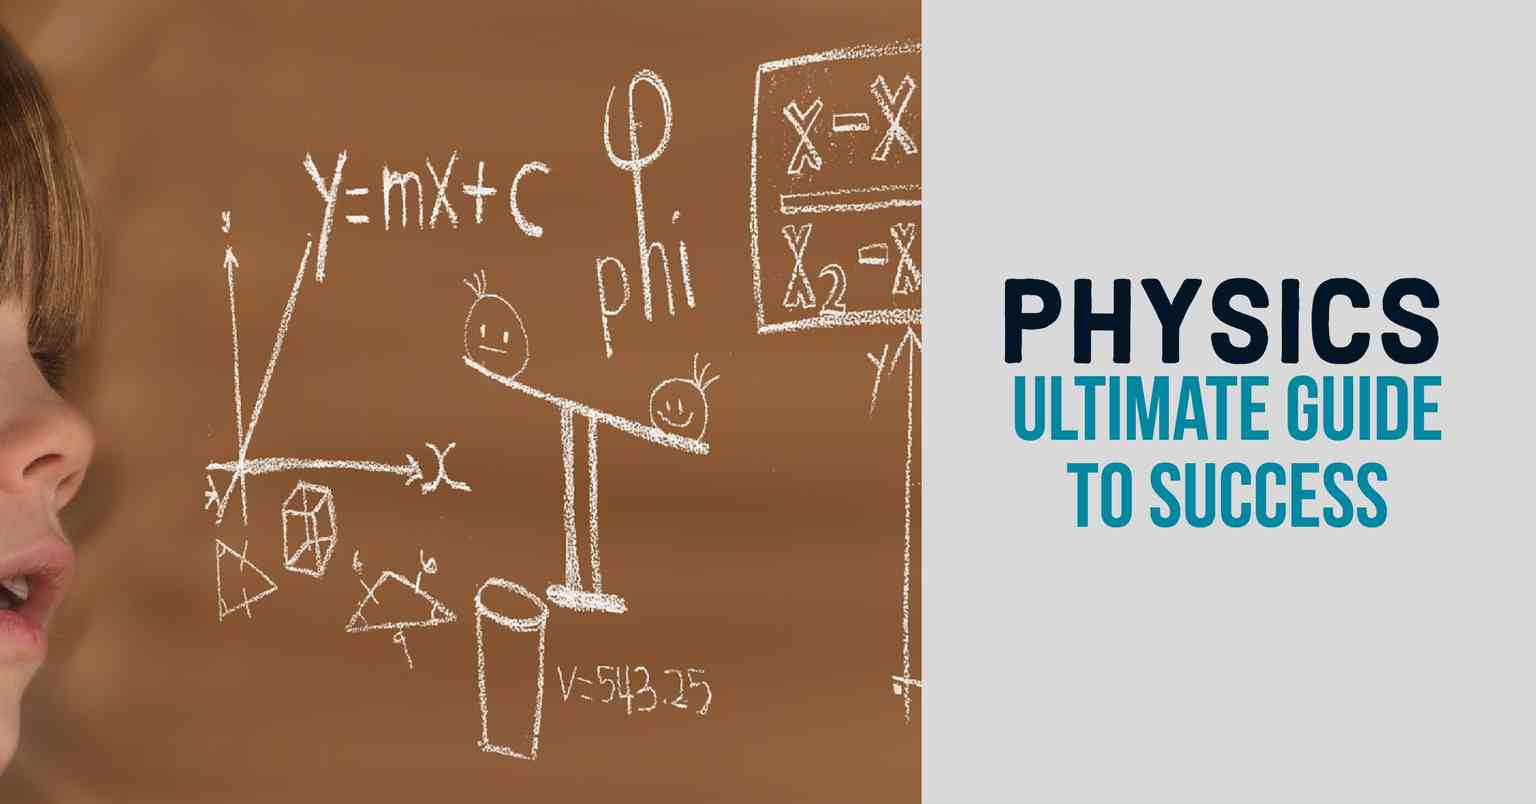 Physics Course Overview